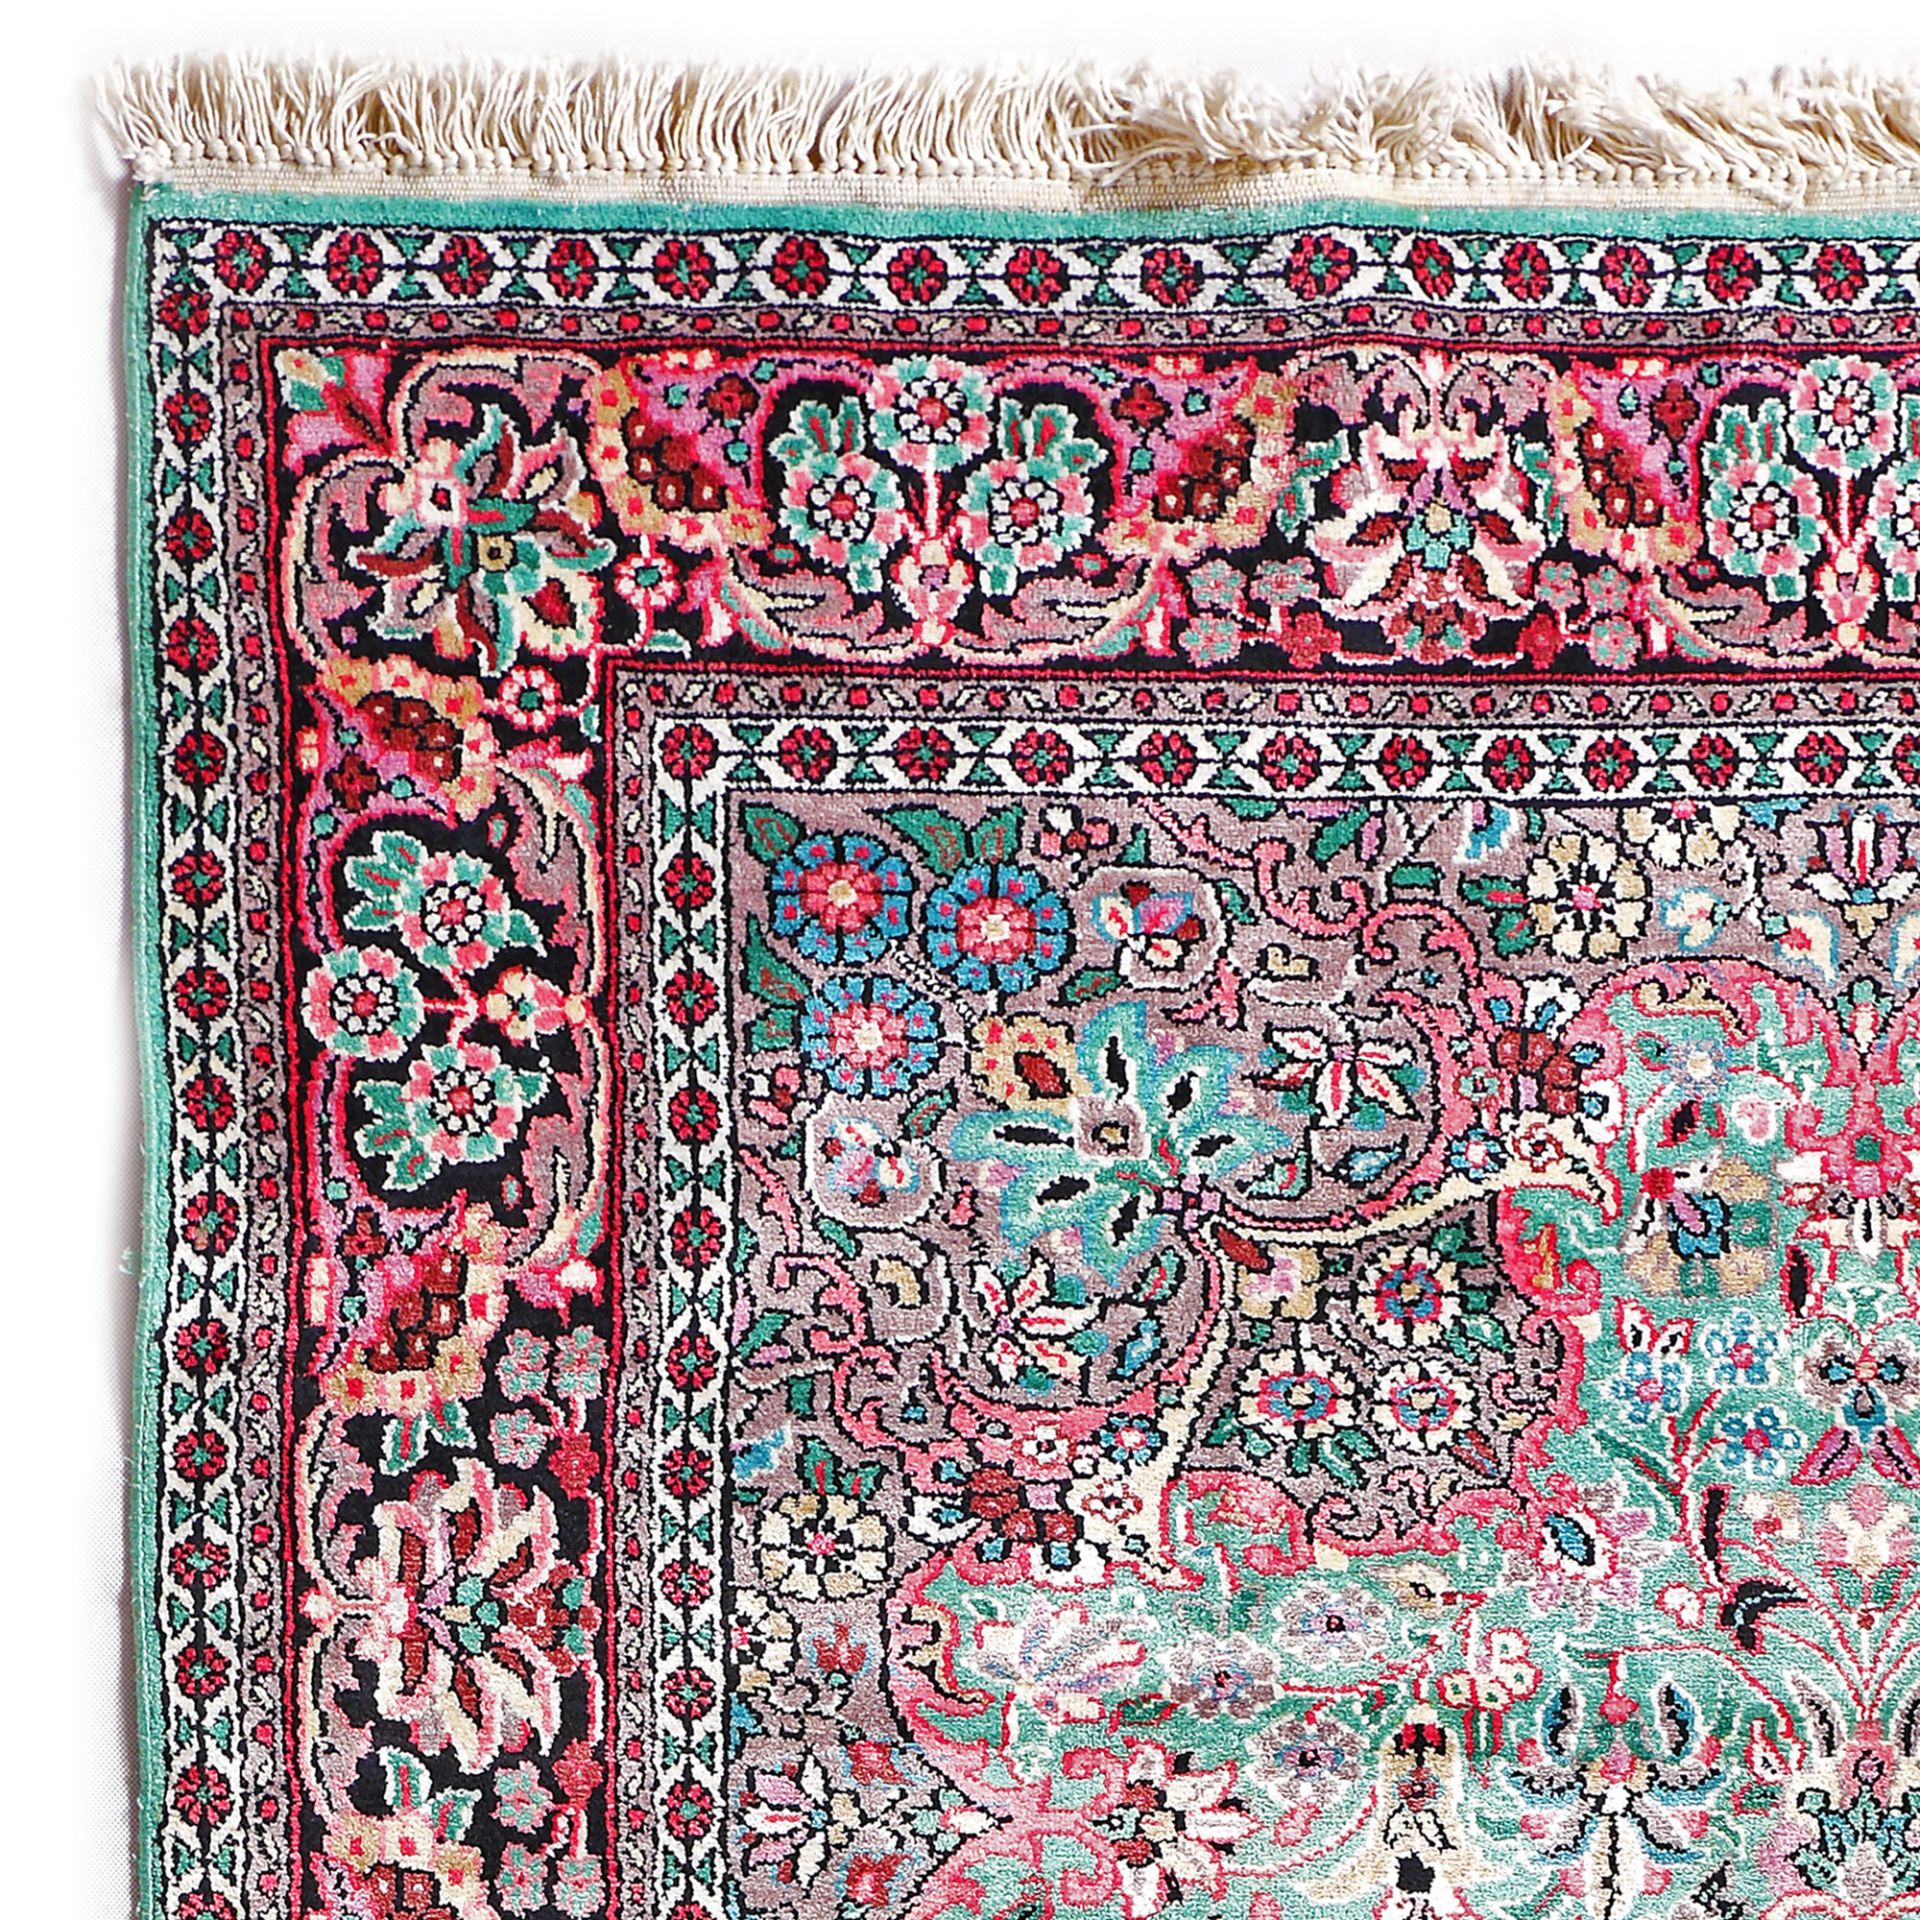 Kashmir rug, silk and cotton, decorated with floral motifs, India - Image 2 of 2